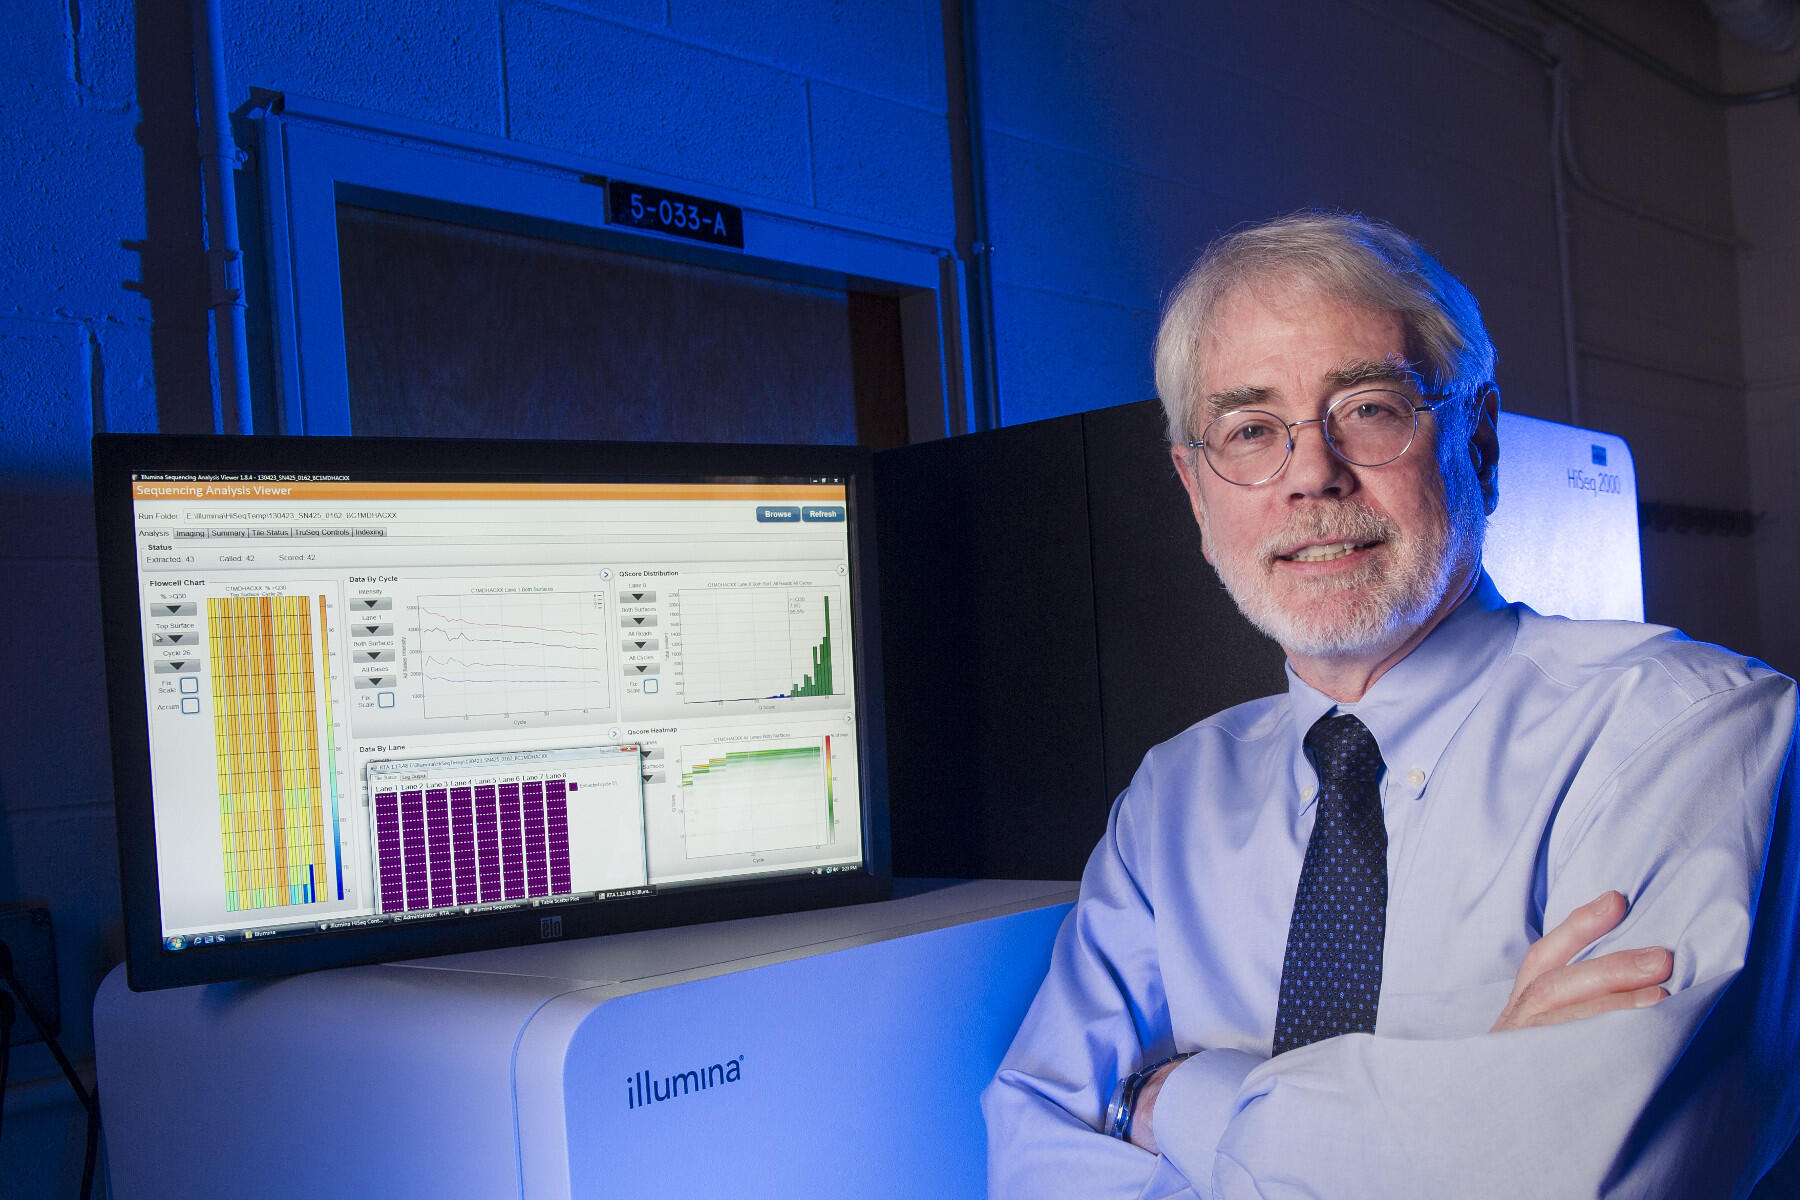 Members of the College of Fellows and peers selected Gregory Buck, Ph.D., for his outstanding contributions to the field of genomics, bioinformatics and microbial systems biology and microbiome science. (University Relations file photo)